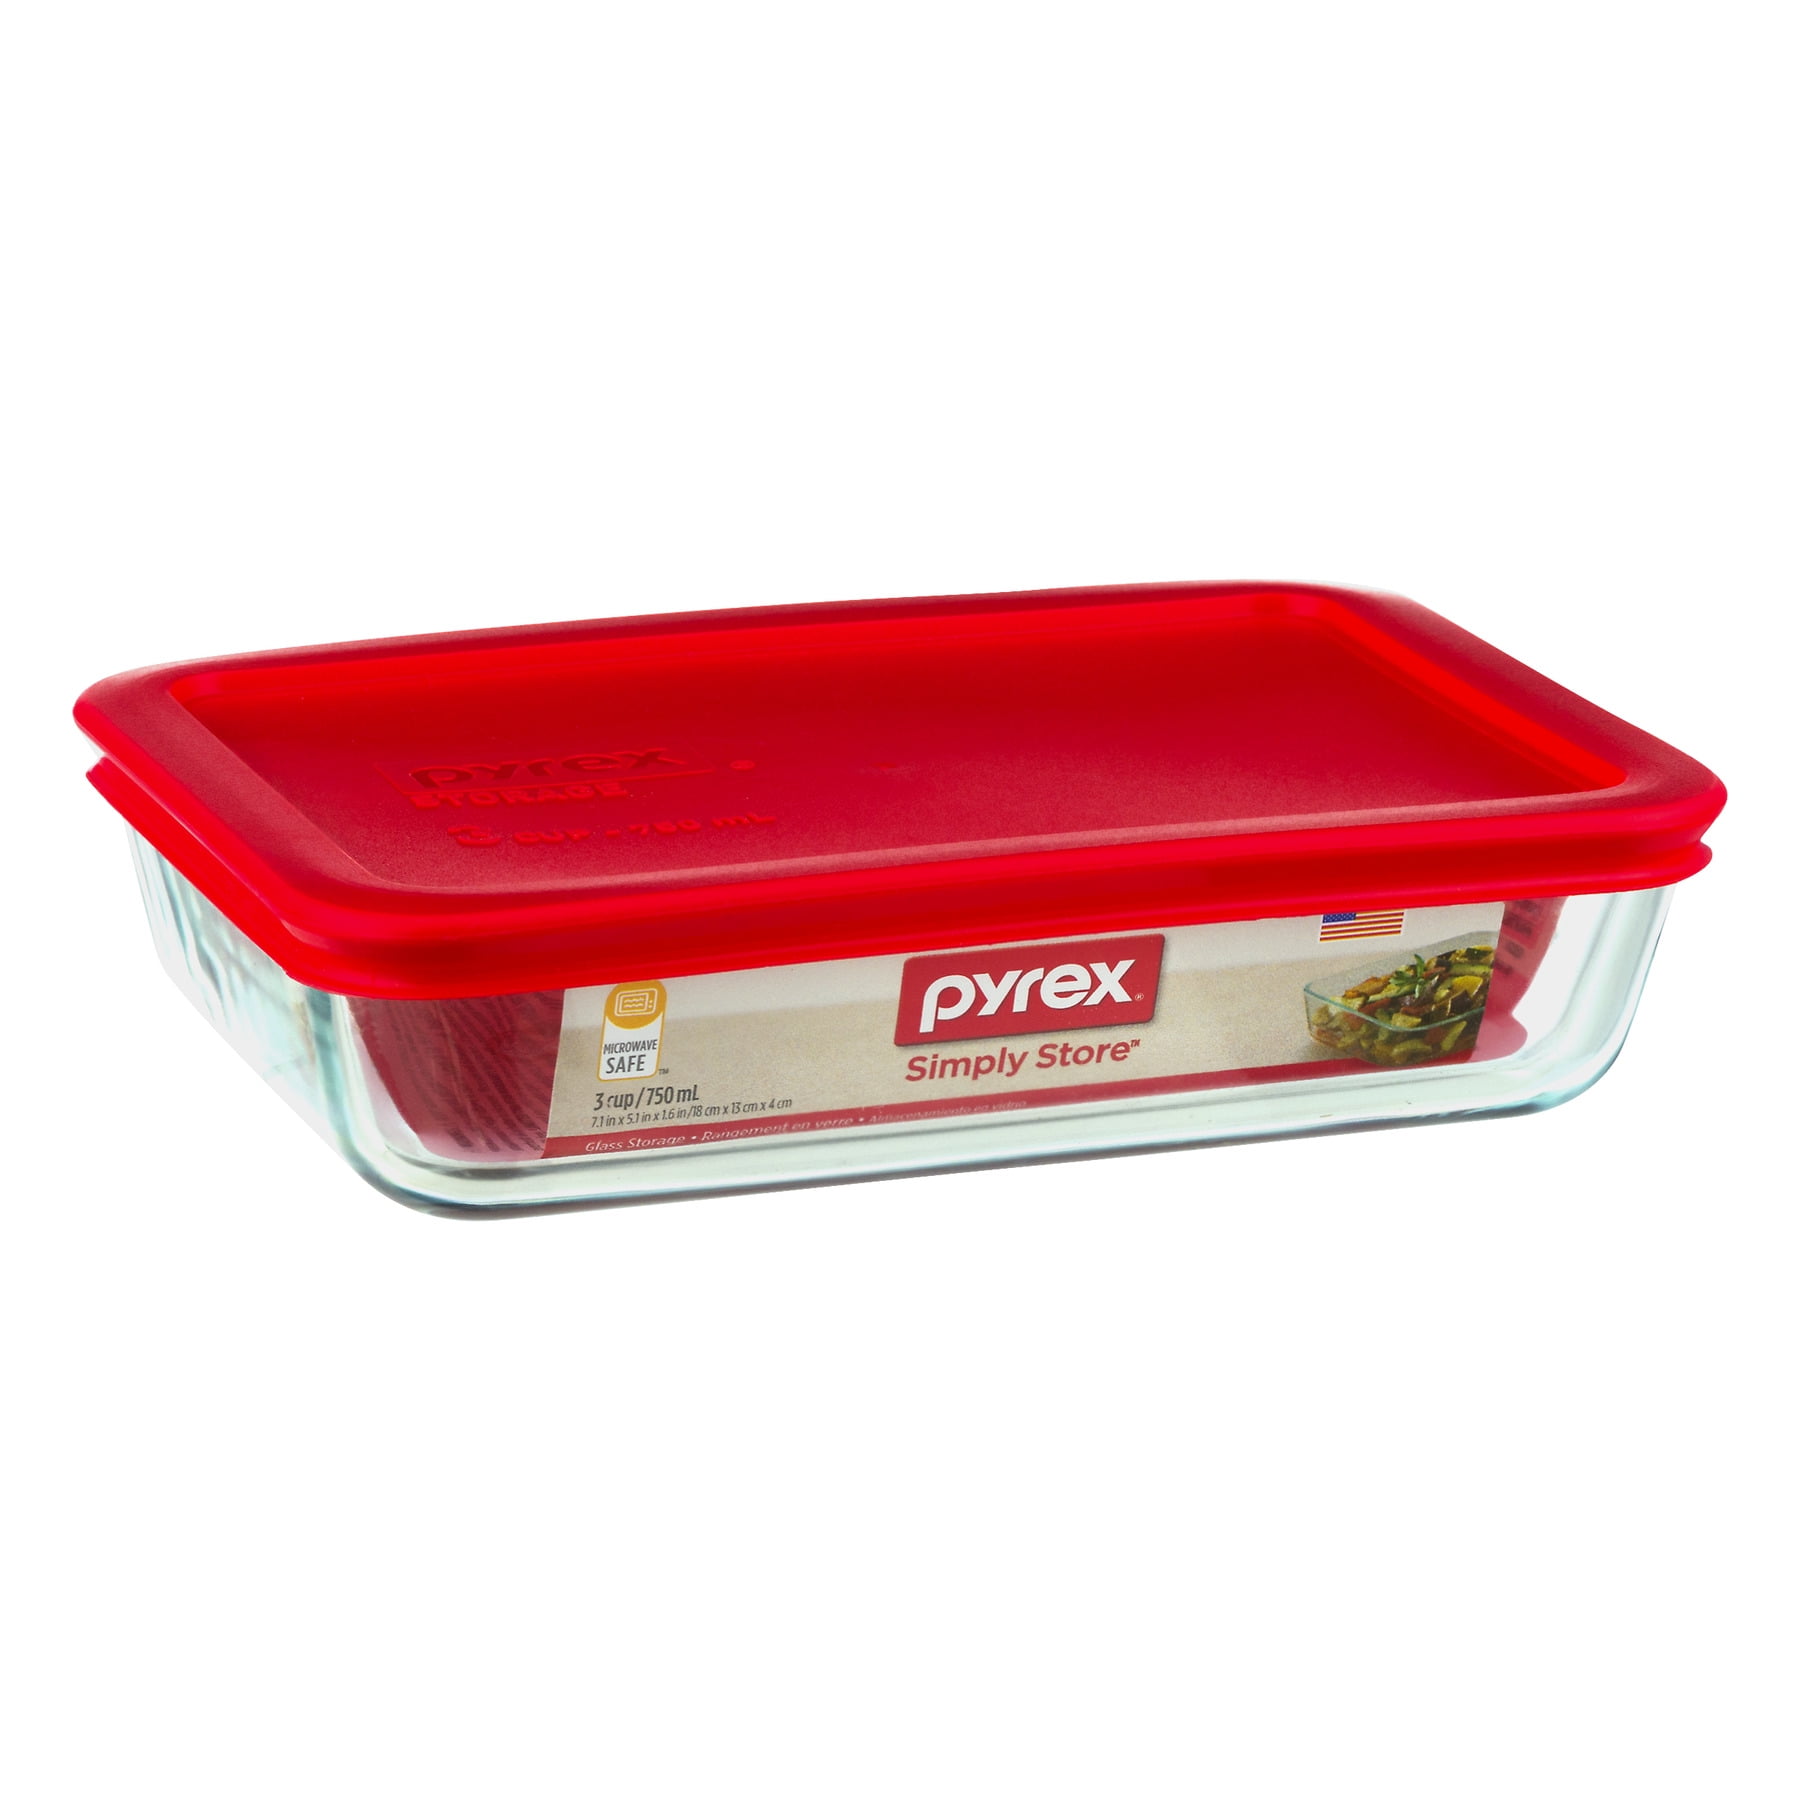 Pyrex Simply Store Glass Rectangular Food Container with Red Lid 3-cup 